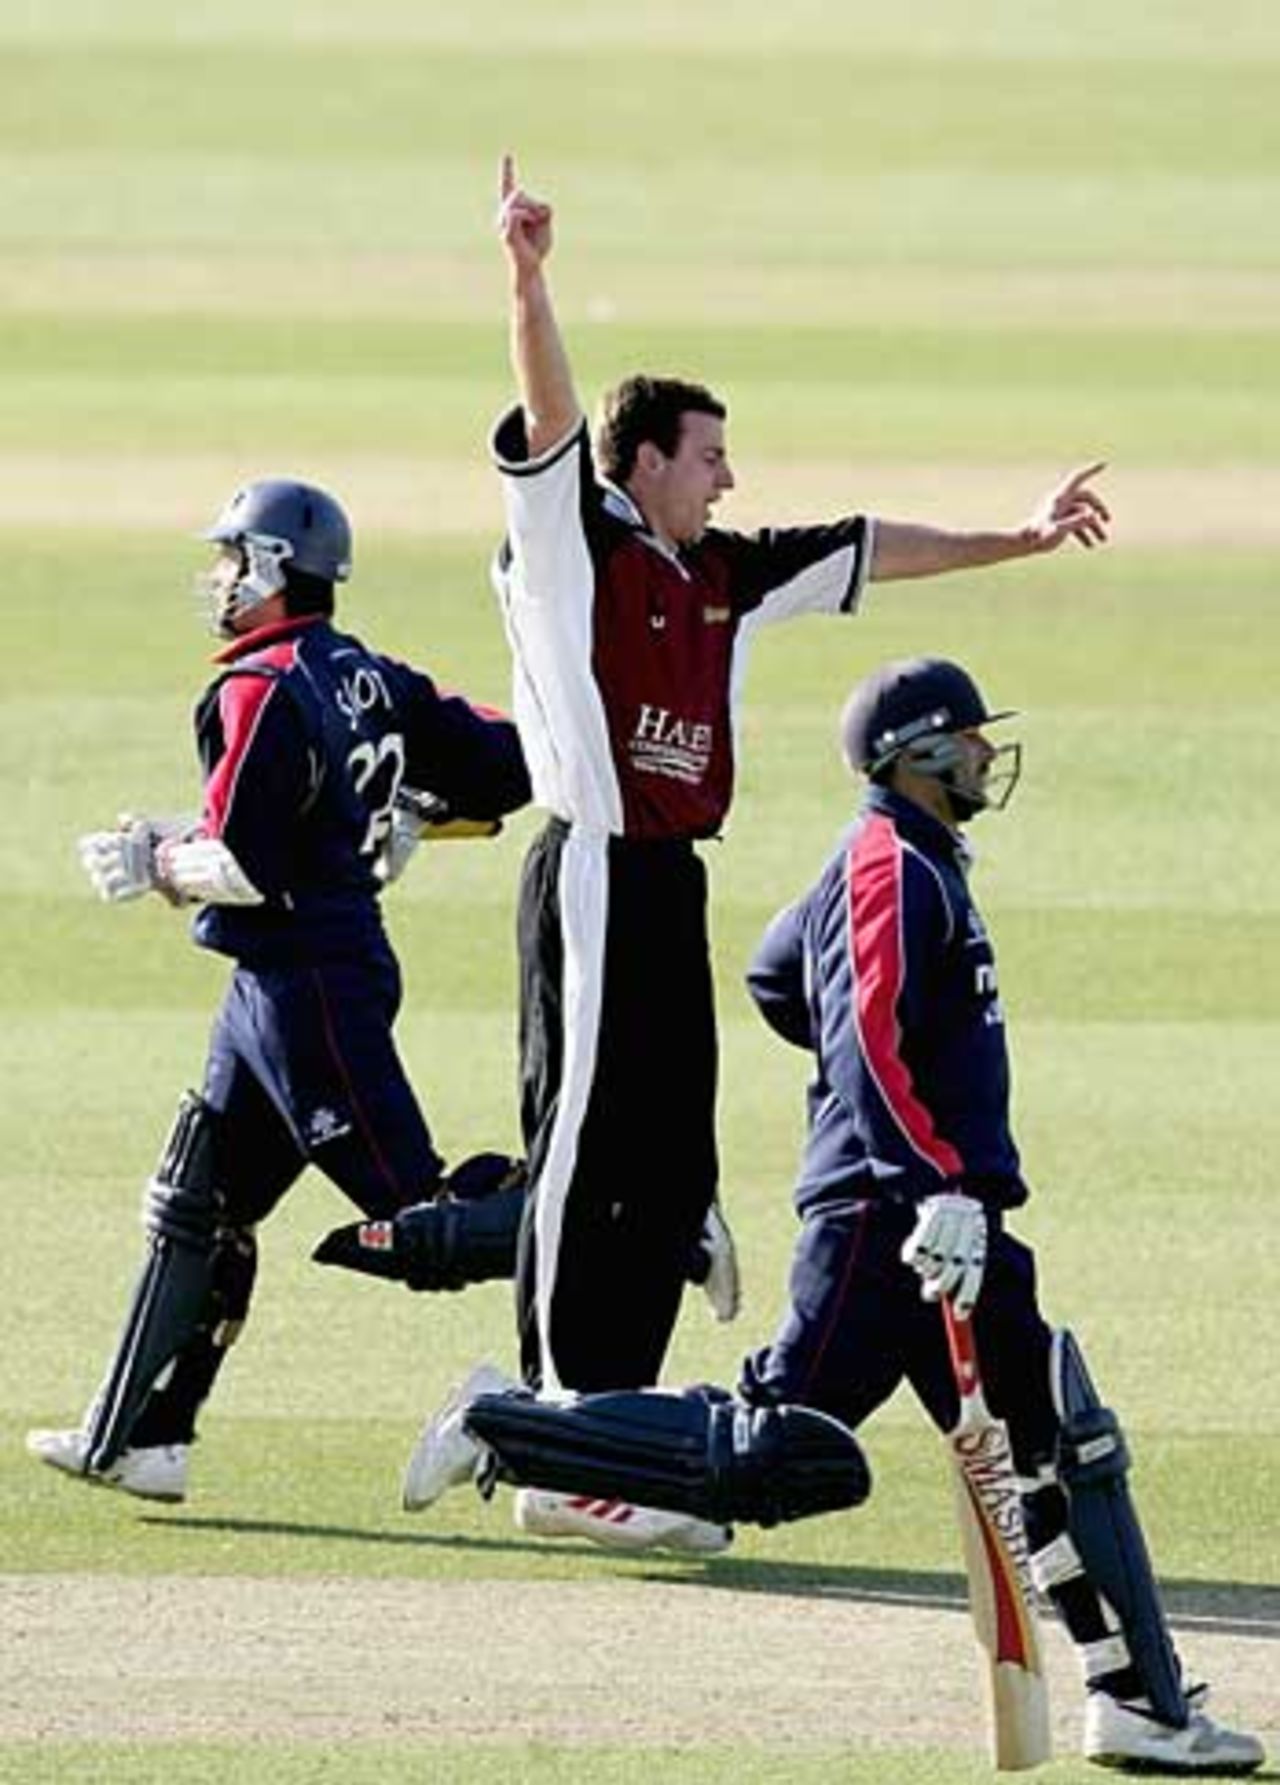 Johann Louw celebrates the wicket of Ben Scott, Middlesex v Northamptonshire, C&G Trophy, Lord's, May 17